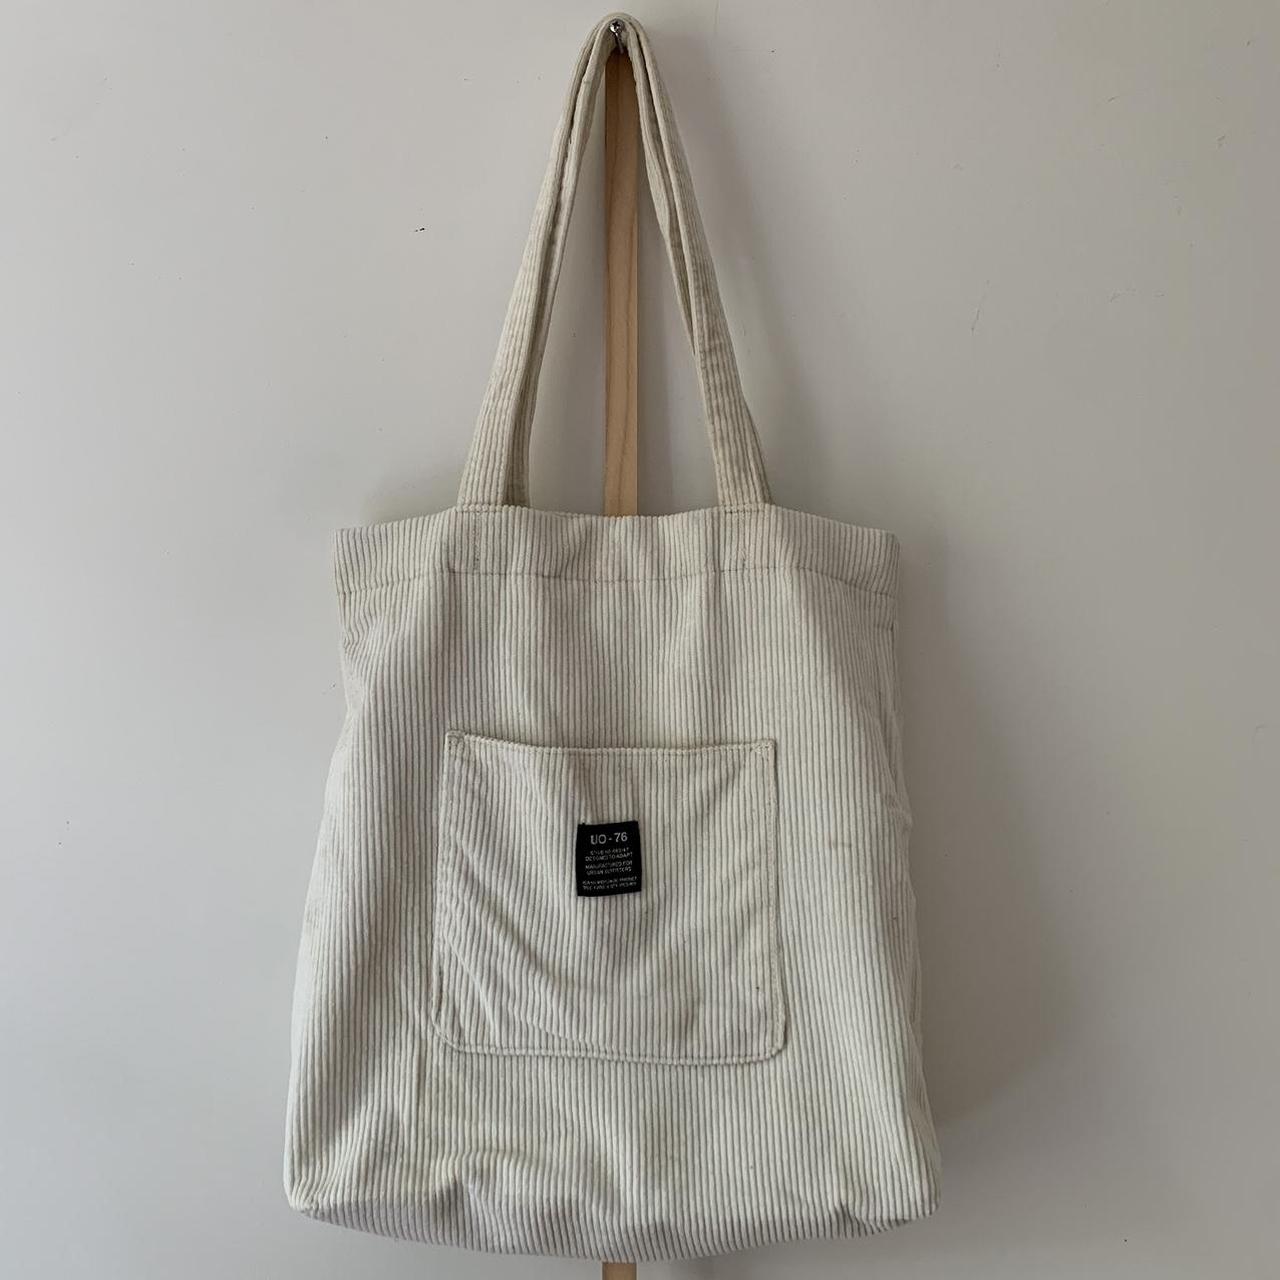 Urban Outfitters Women's White Bag | Depop